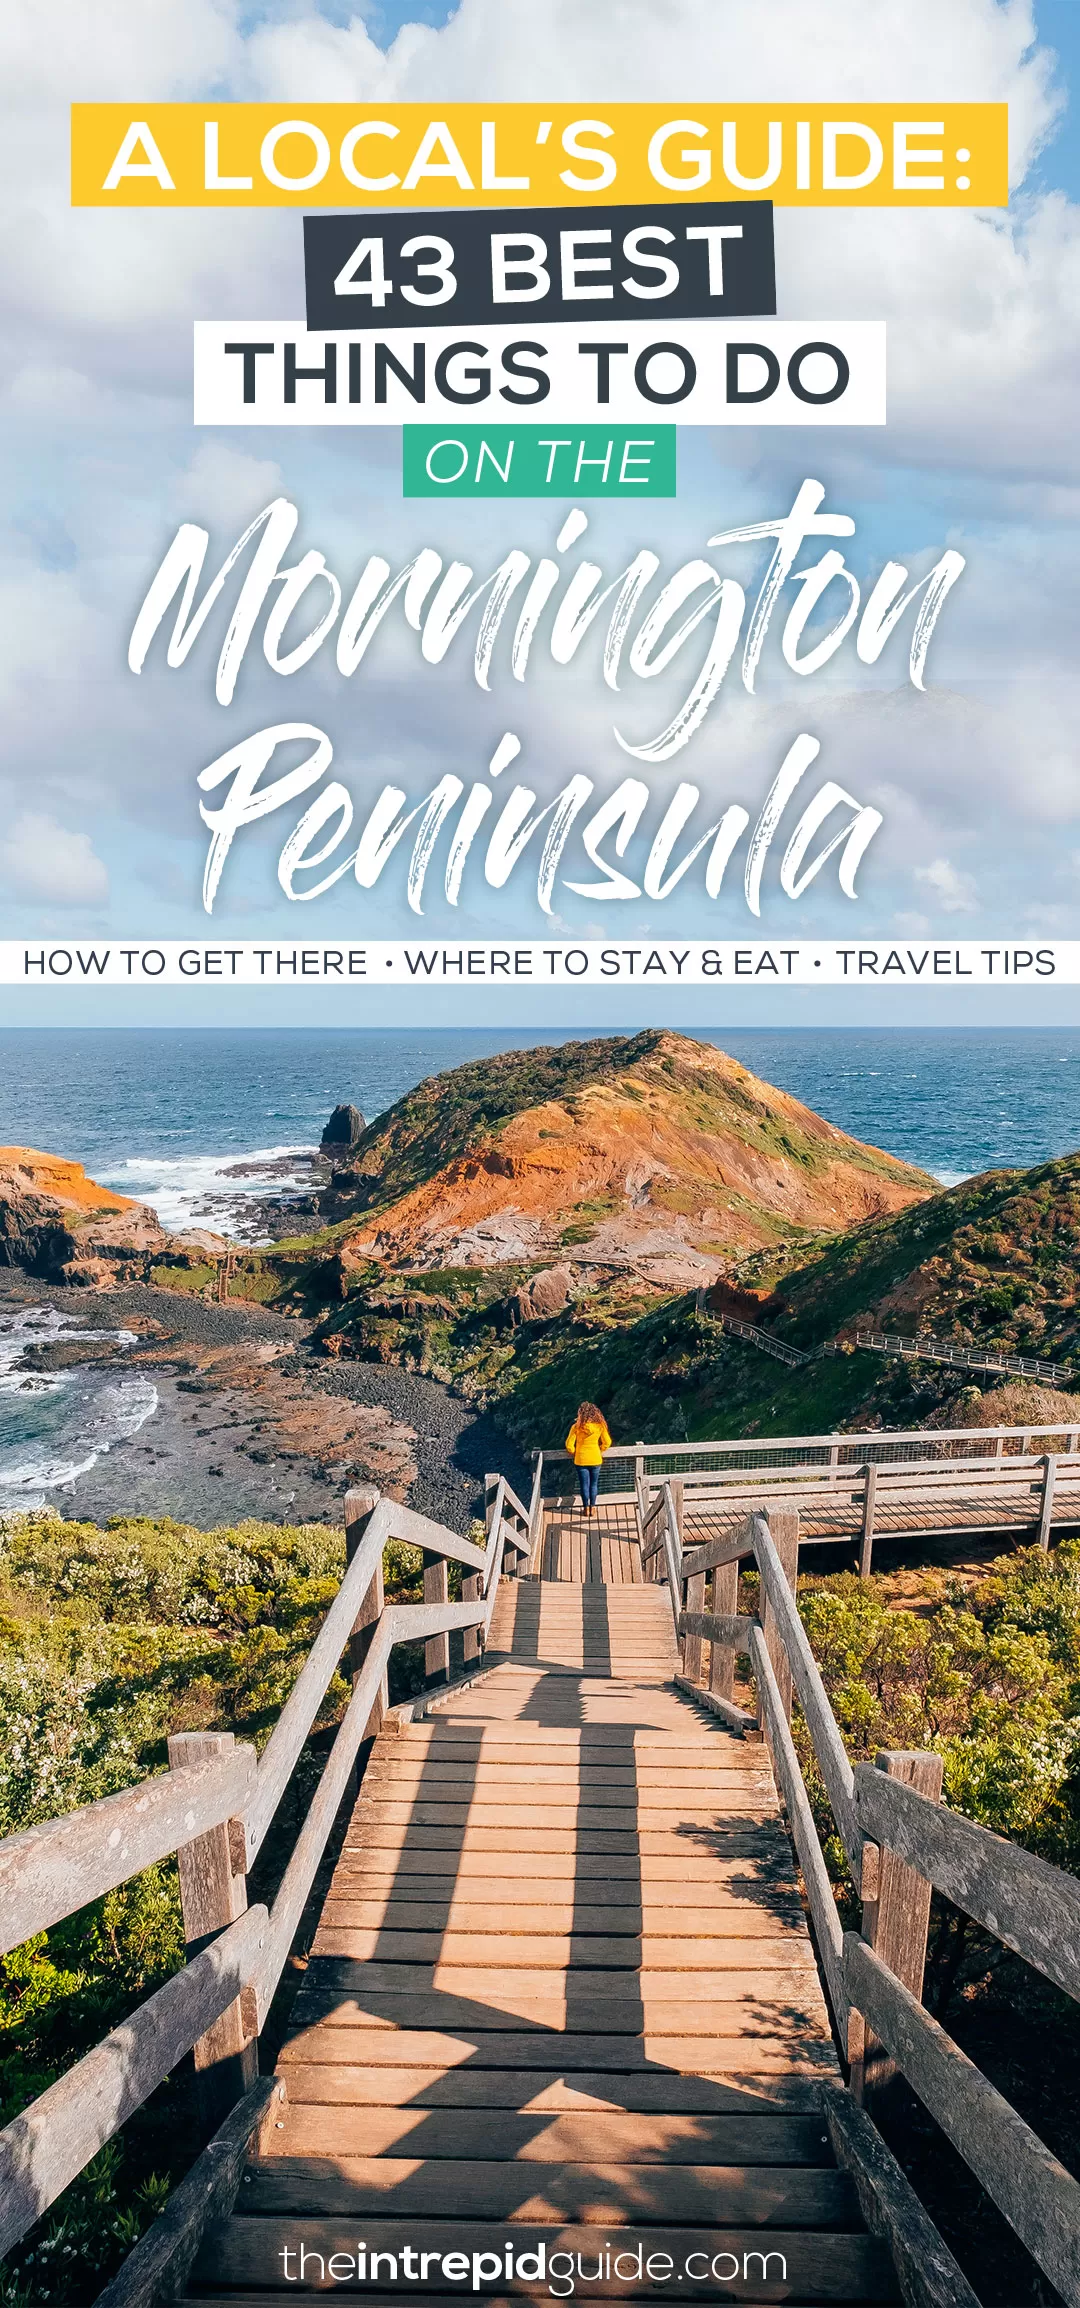 43 Best things to do on the Mornington Peninsula Plus Itinerary, Where to Stay, Where to Eat and Travel Tips